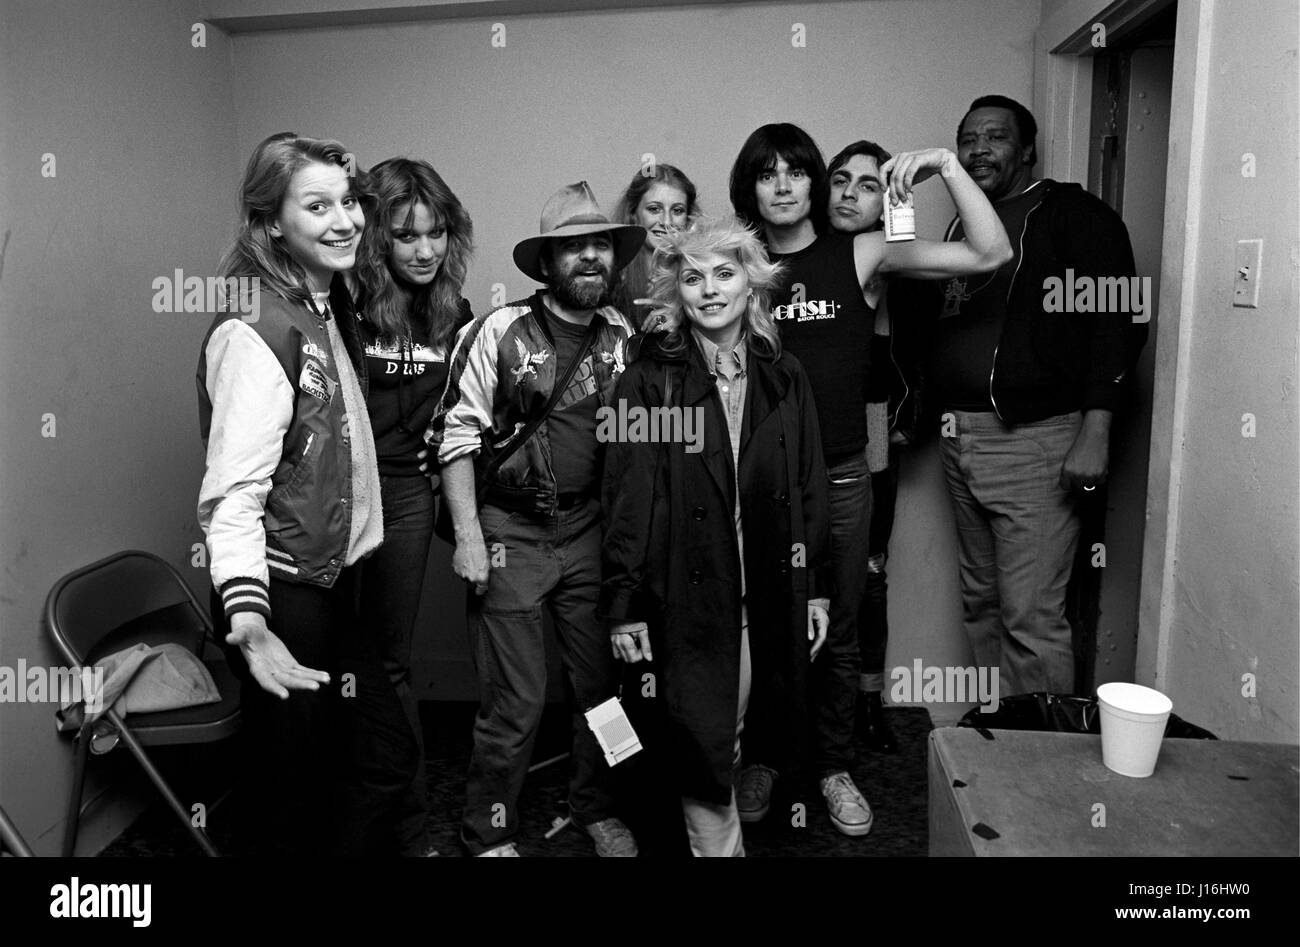 Debbie Harry of Blondie, Dee Dee Ramone of The Ramones & Chris Stein of Blondie backstage with others at the Tower Theatre for a gig by The Runaways, The Ramones & The Jam. March 18, 1978. © mpi09 / MediaPunch Stock Photo